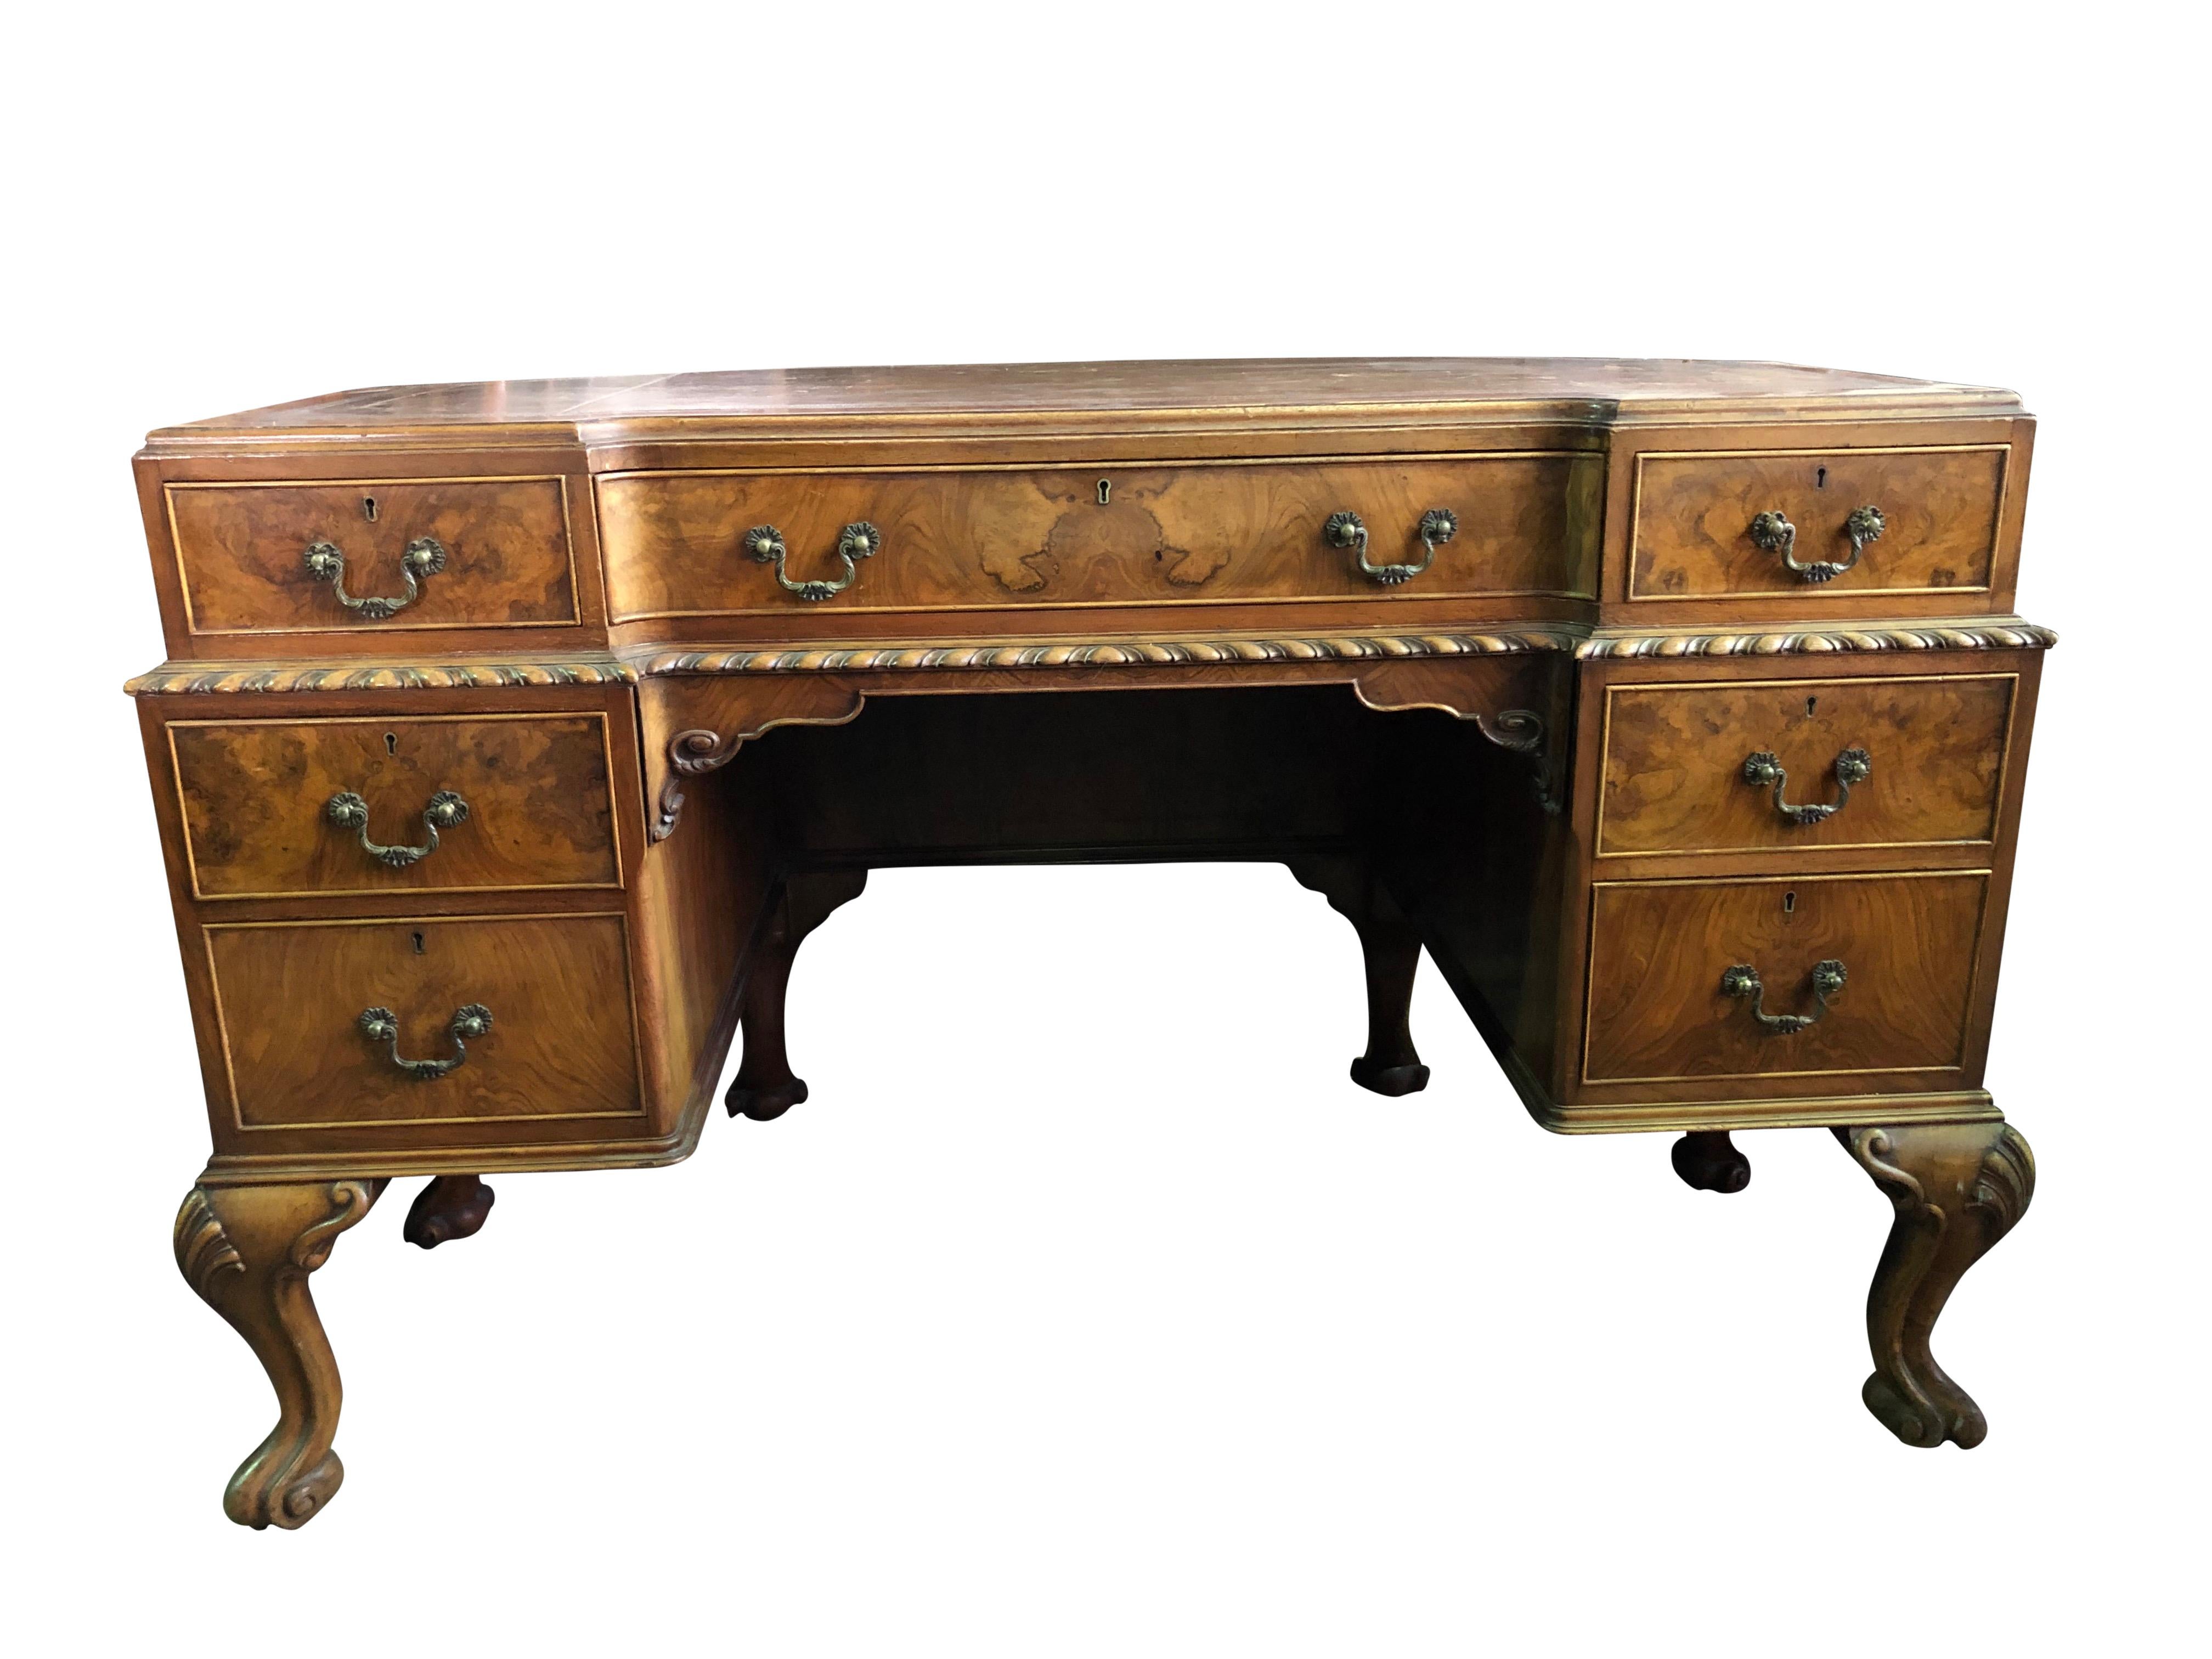 A stunning 19th century Victorian walnut desk with leather top. This beautifully carved desk offers a wonderful walnut, with spectacular well fitting knit-one-purl-one pattern. I absolutely love the seamless transition from ribbed brim to lace